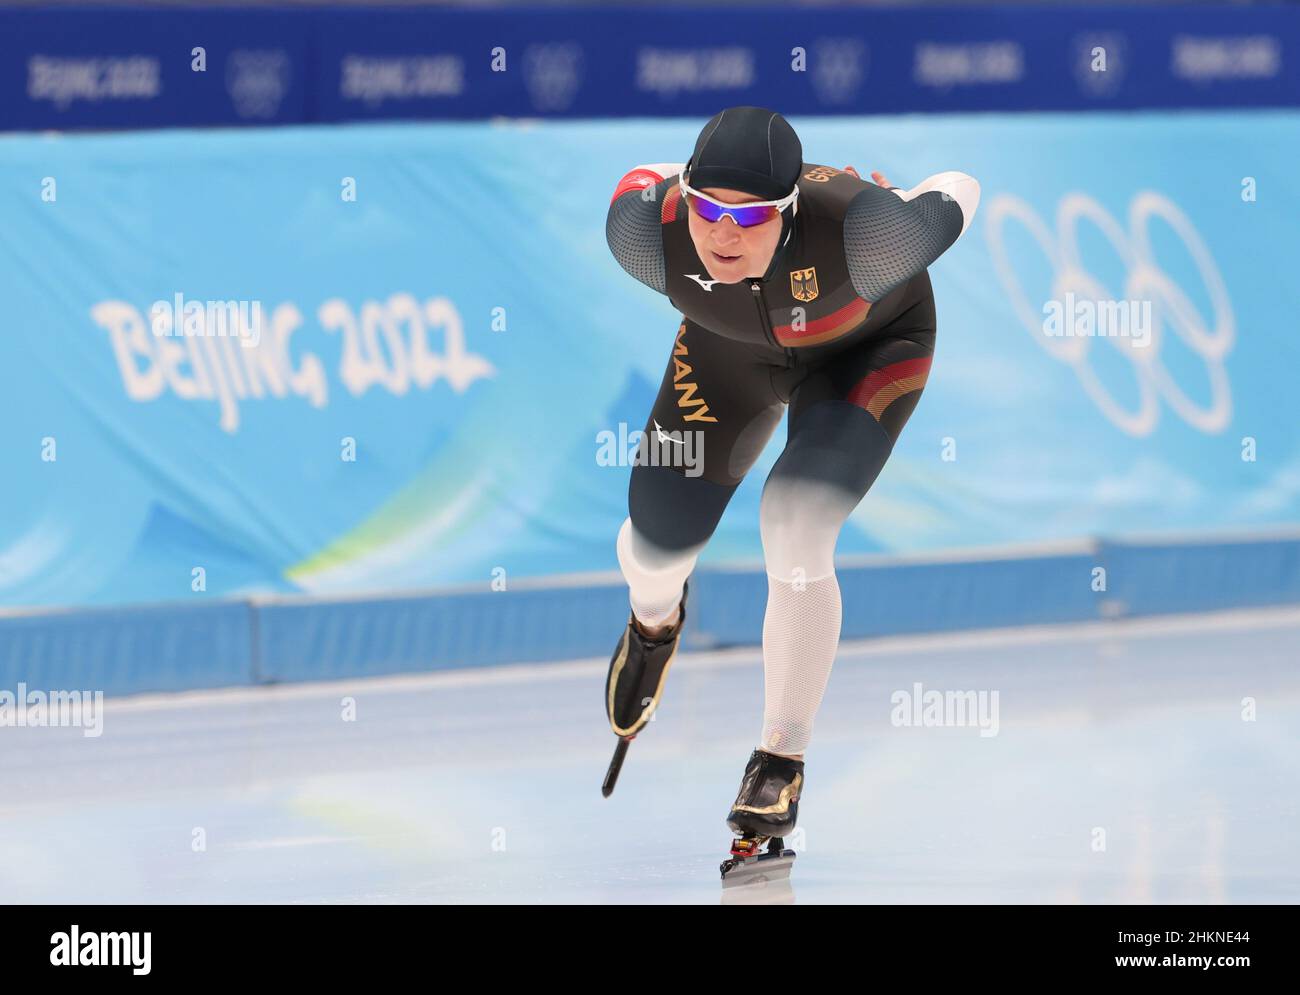 Beijing, China. 5th Feb, 2022. Claudia Pechstein of Germany competes during the women's 3,000m final of speed skating at the National Speed Skating Oval in Beijing, capital of China, Feb. 5, 2022. Credit: Ding Xu/Xinhua/Alamy Live News Stock Photo